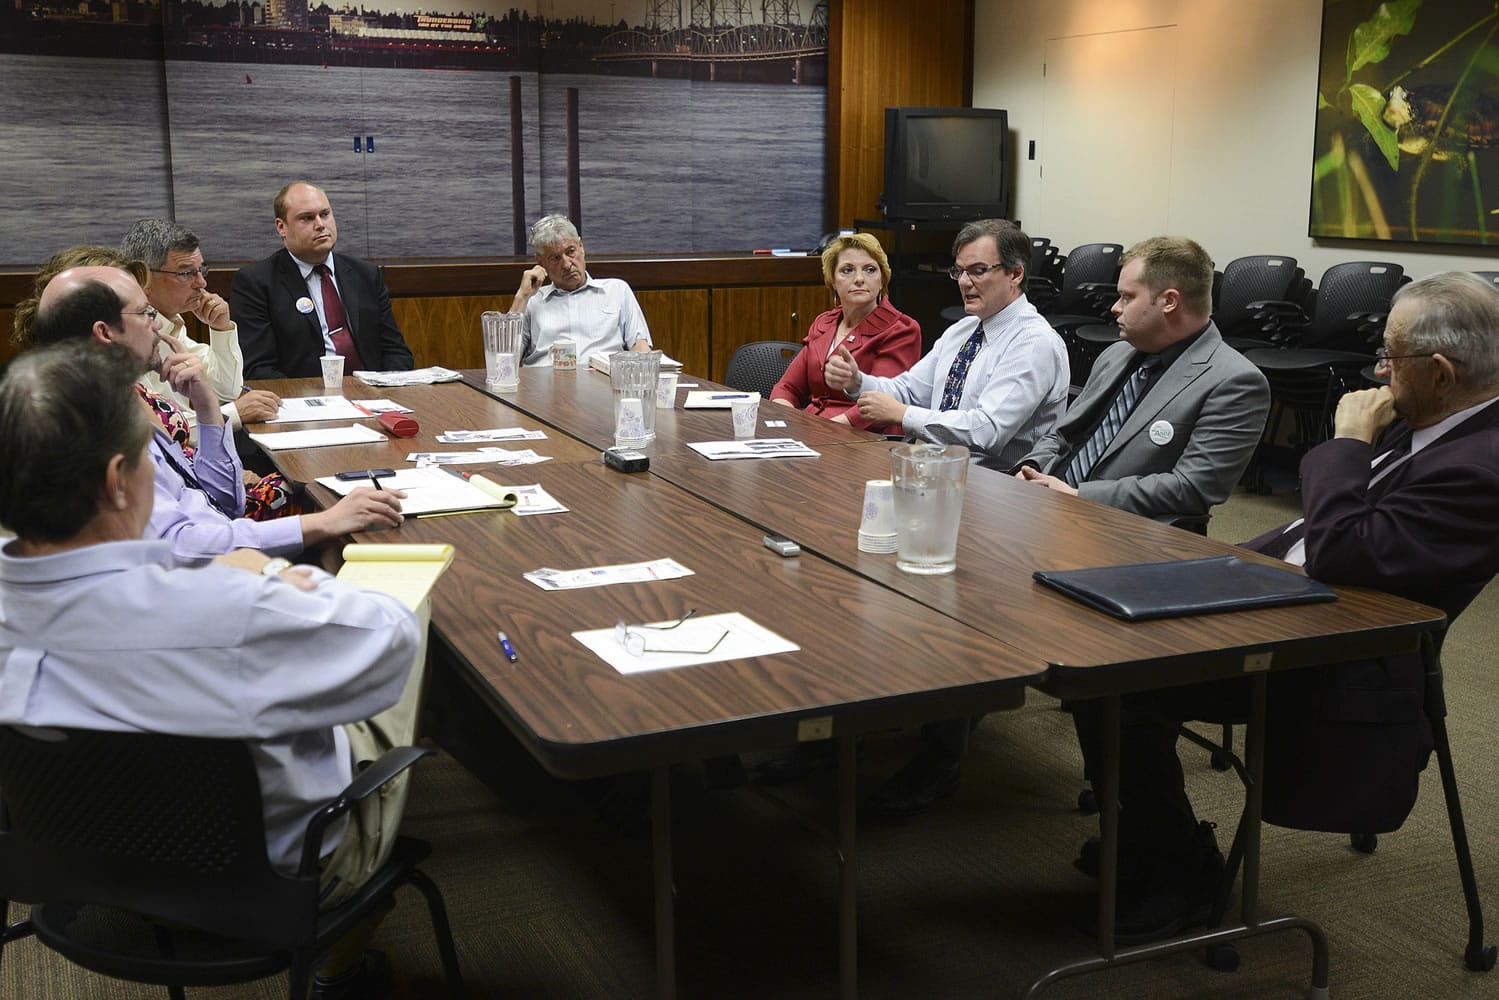 Six of seven candidates for Port of Vancouver commissioner fielded questions Monday from The Columbian's editorial board, who sit at the left of the table. Clockwise from the head of the table are: Eric LaBrant, Bob Durgan, Lisa Ross, Peter Harrison, Nick Ande and Bill Hughes.